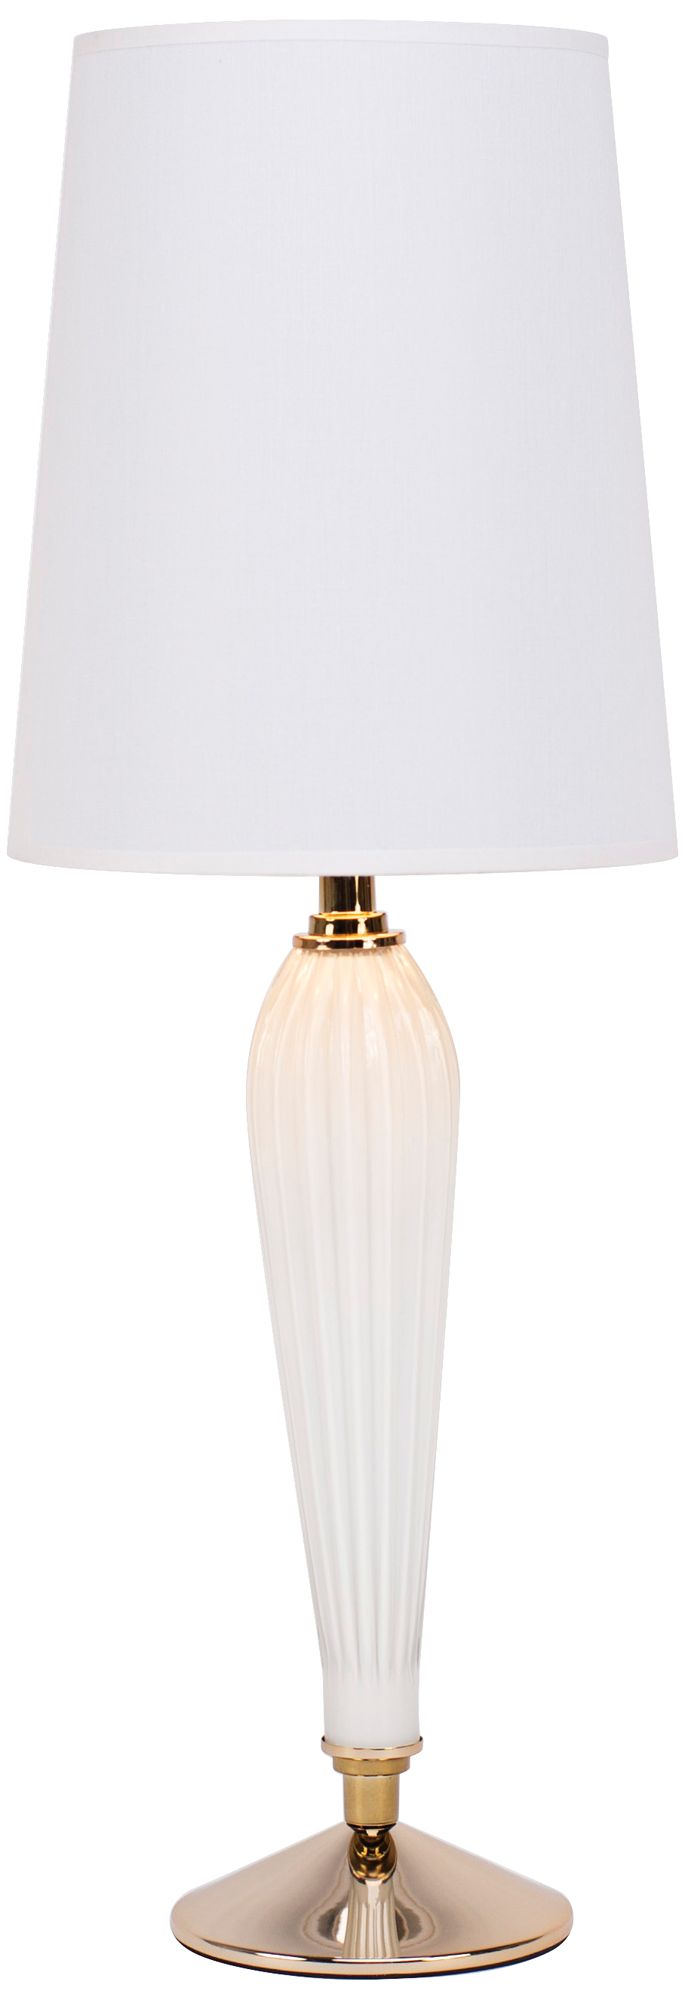 white and silver table lamp